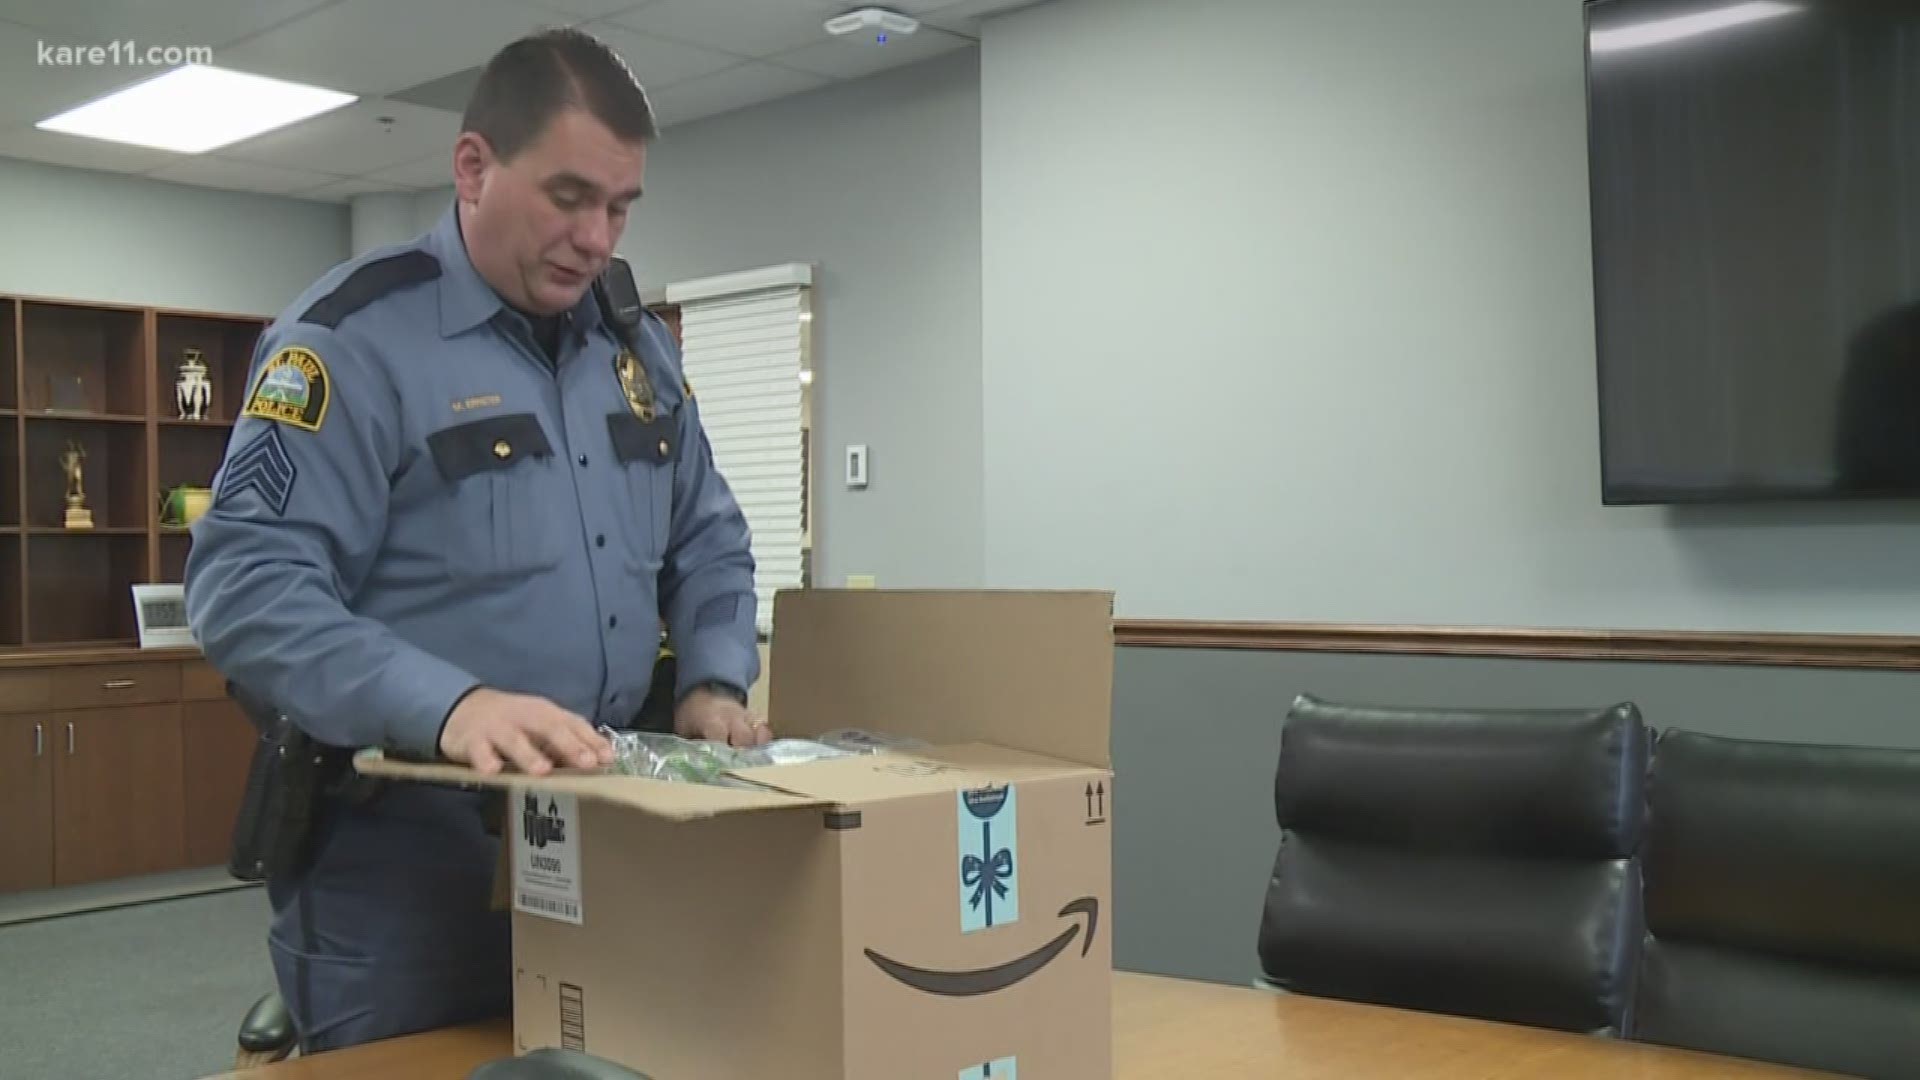 St. Paul police will be dropping decoy packages across the city, hoping to catch thieves who steal them from doorsteps.